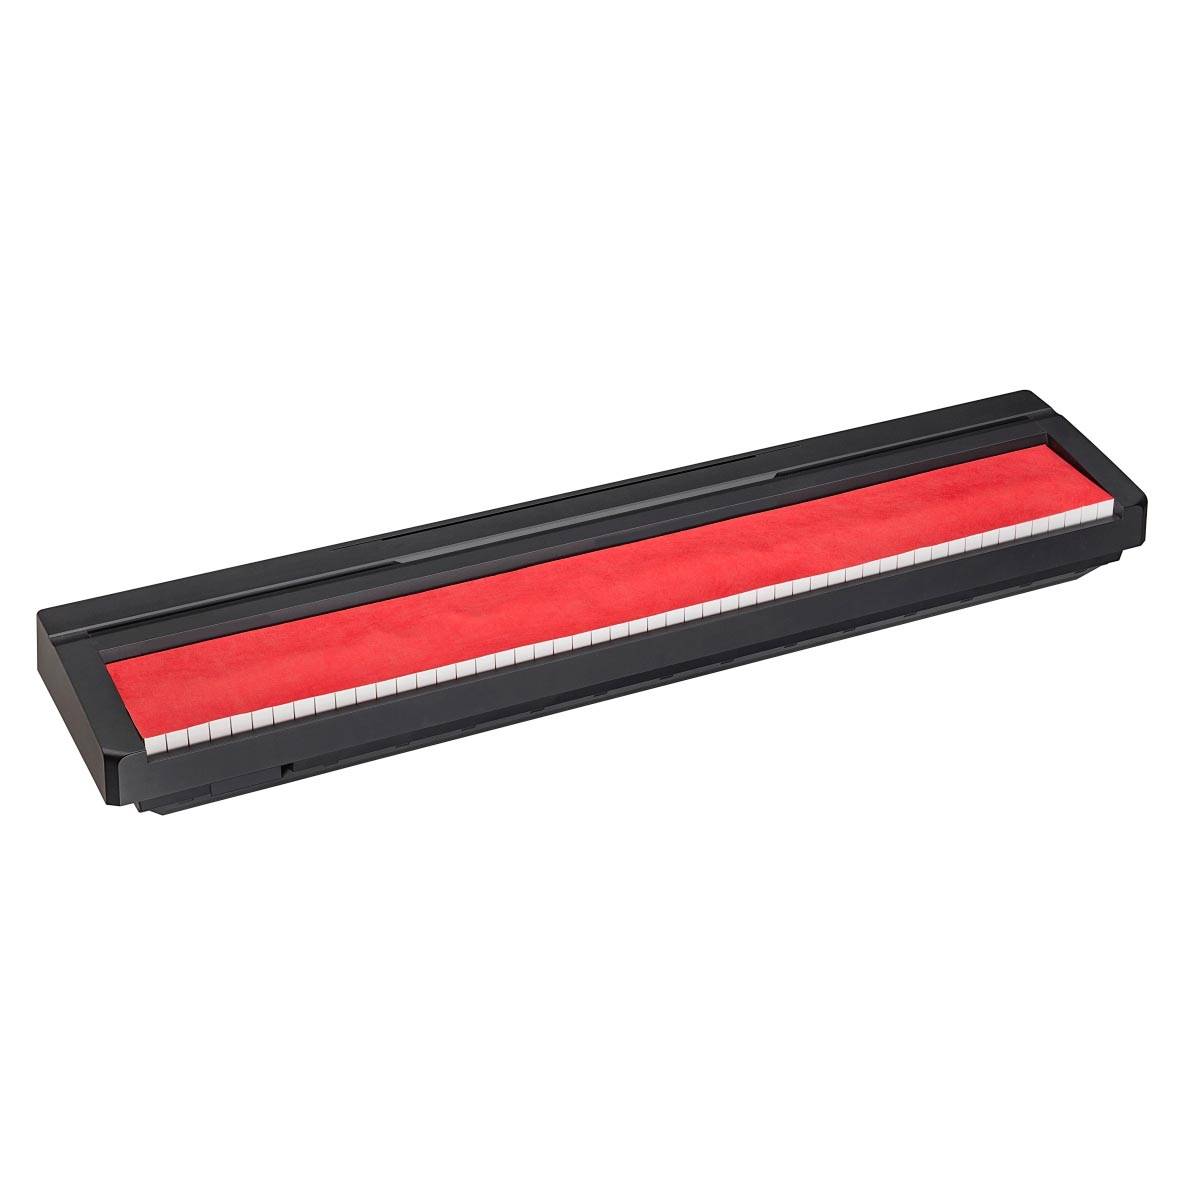 SOUNDSATION UL-SP88-C Red Keyboard Covers